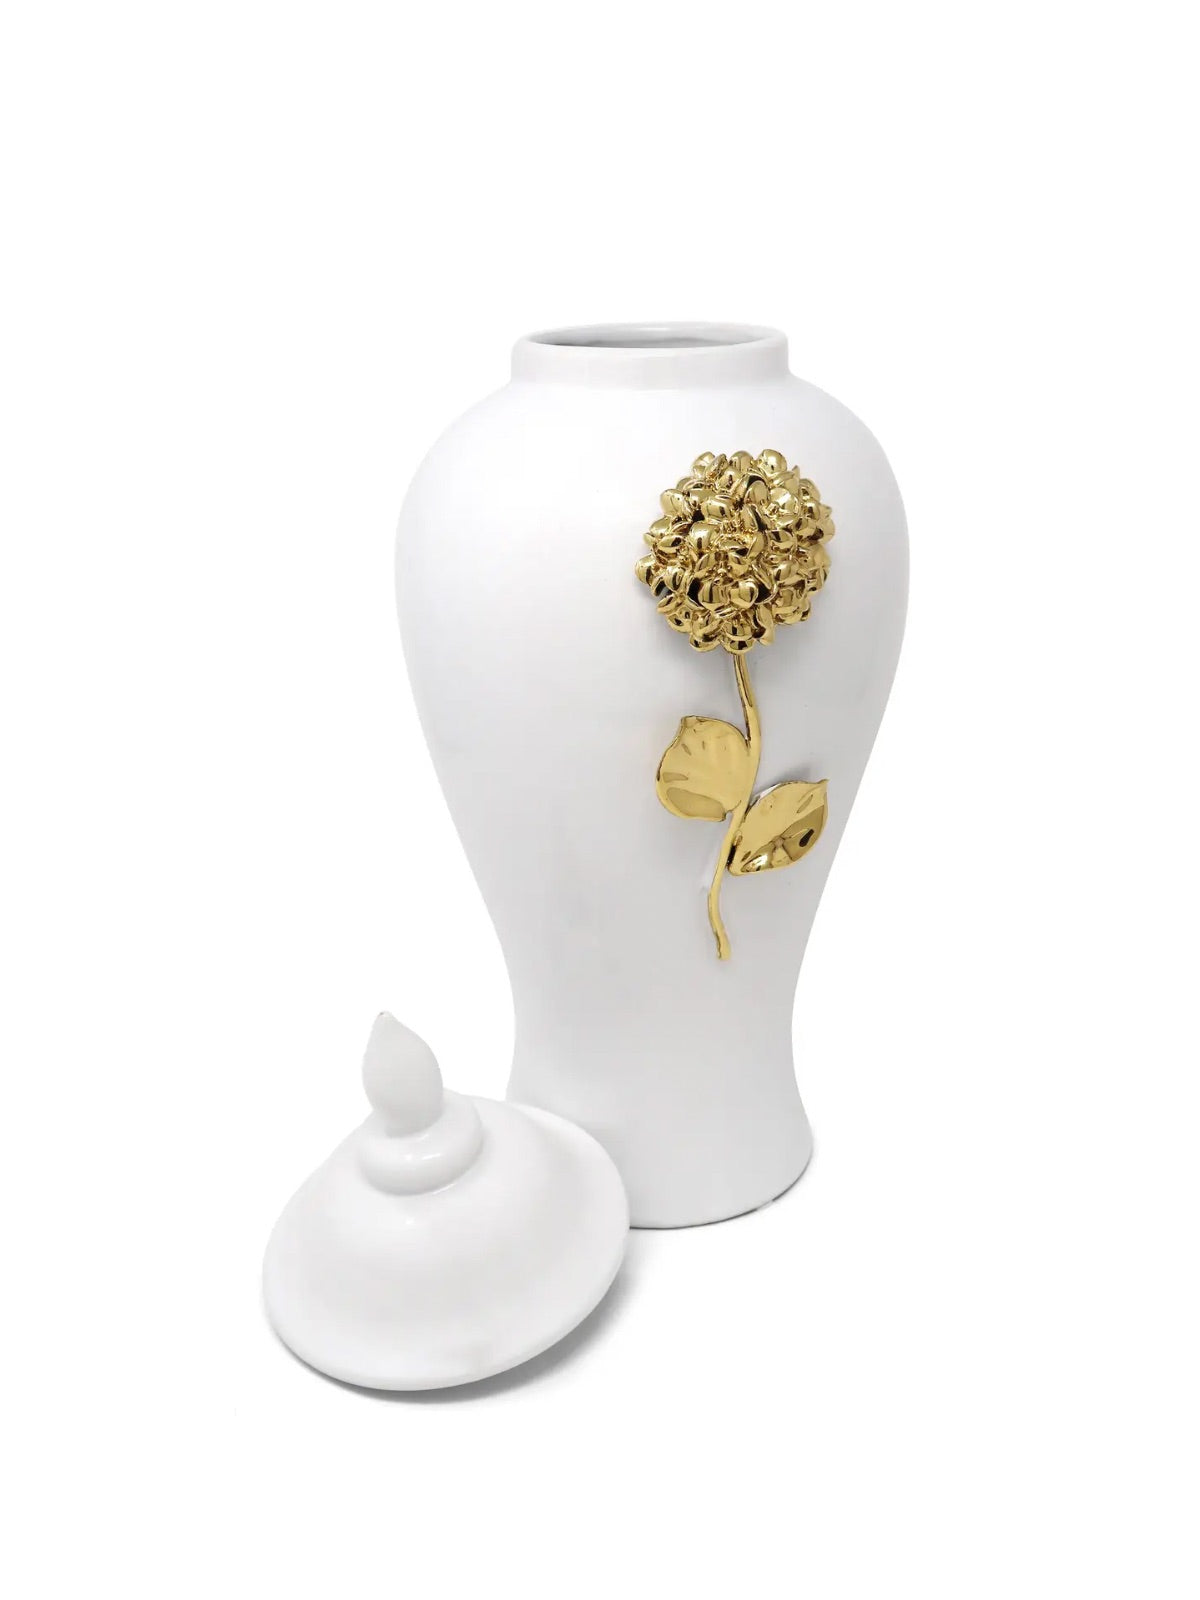 White Ceramic Ginger Jar with Sparkling Gold Flower Detail with Lid Off.